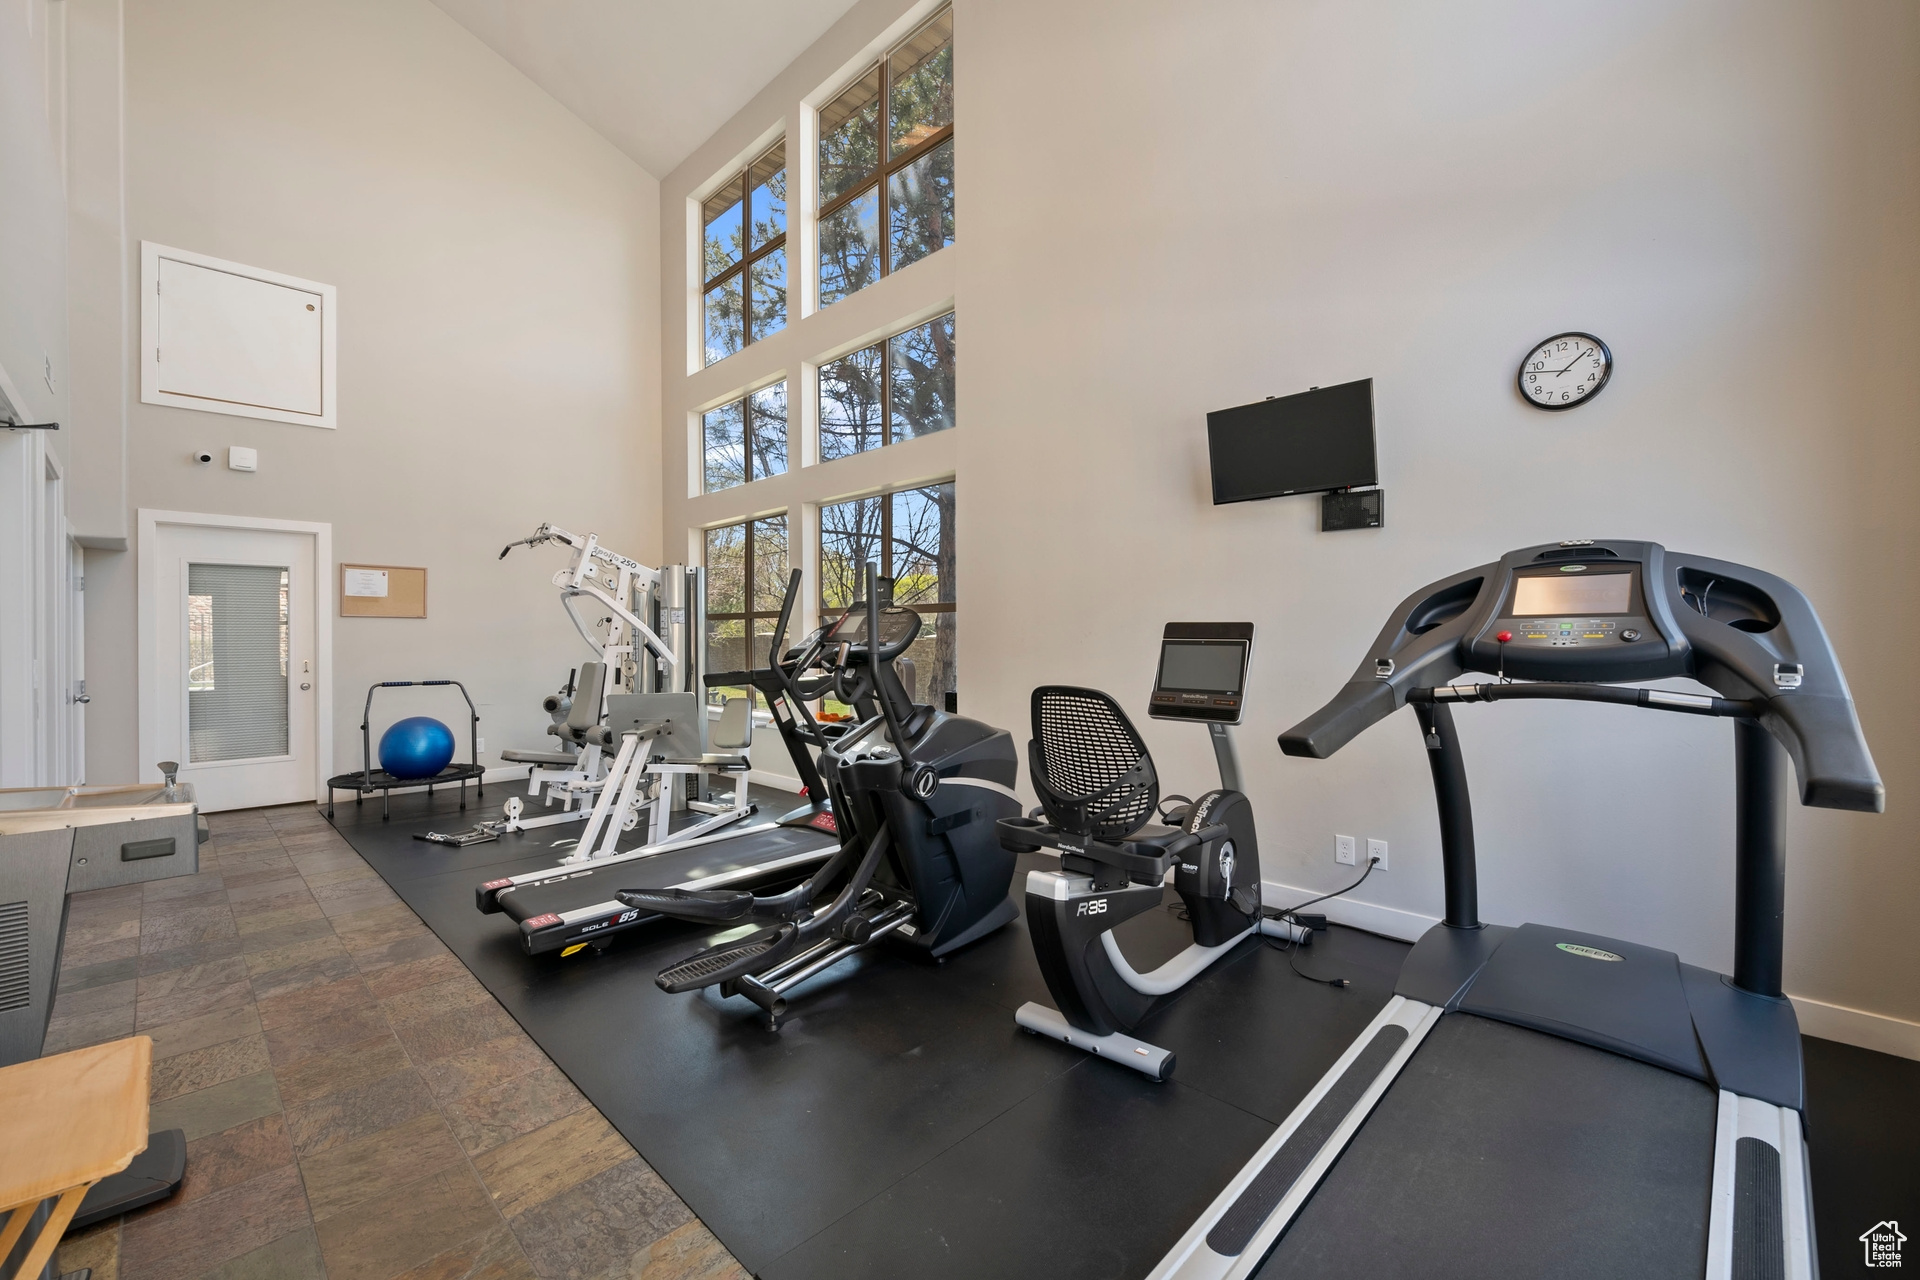 Gym with tons of natural light and variety of equipment.